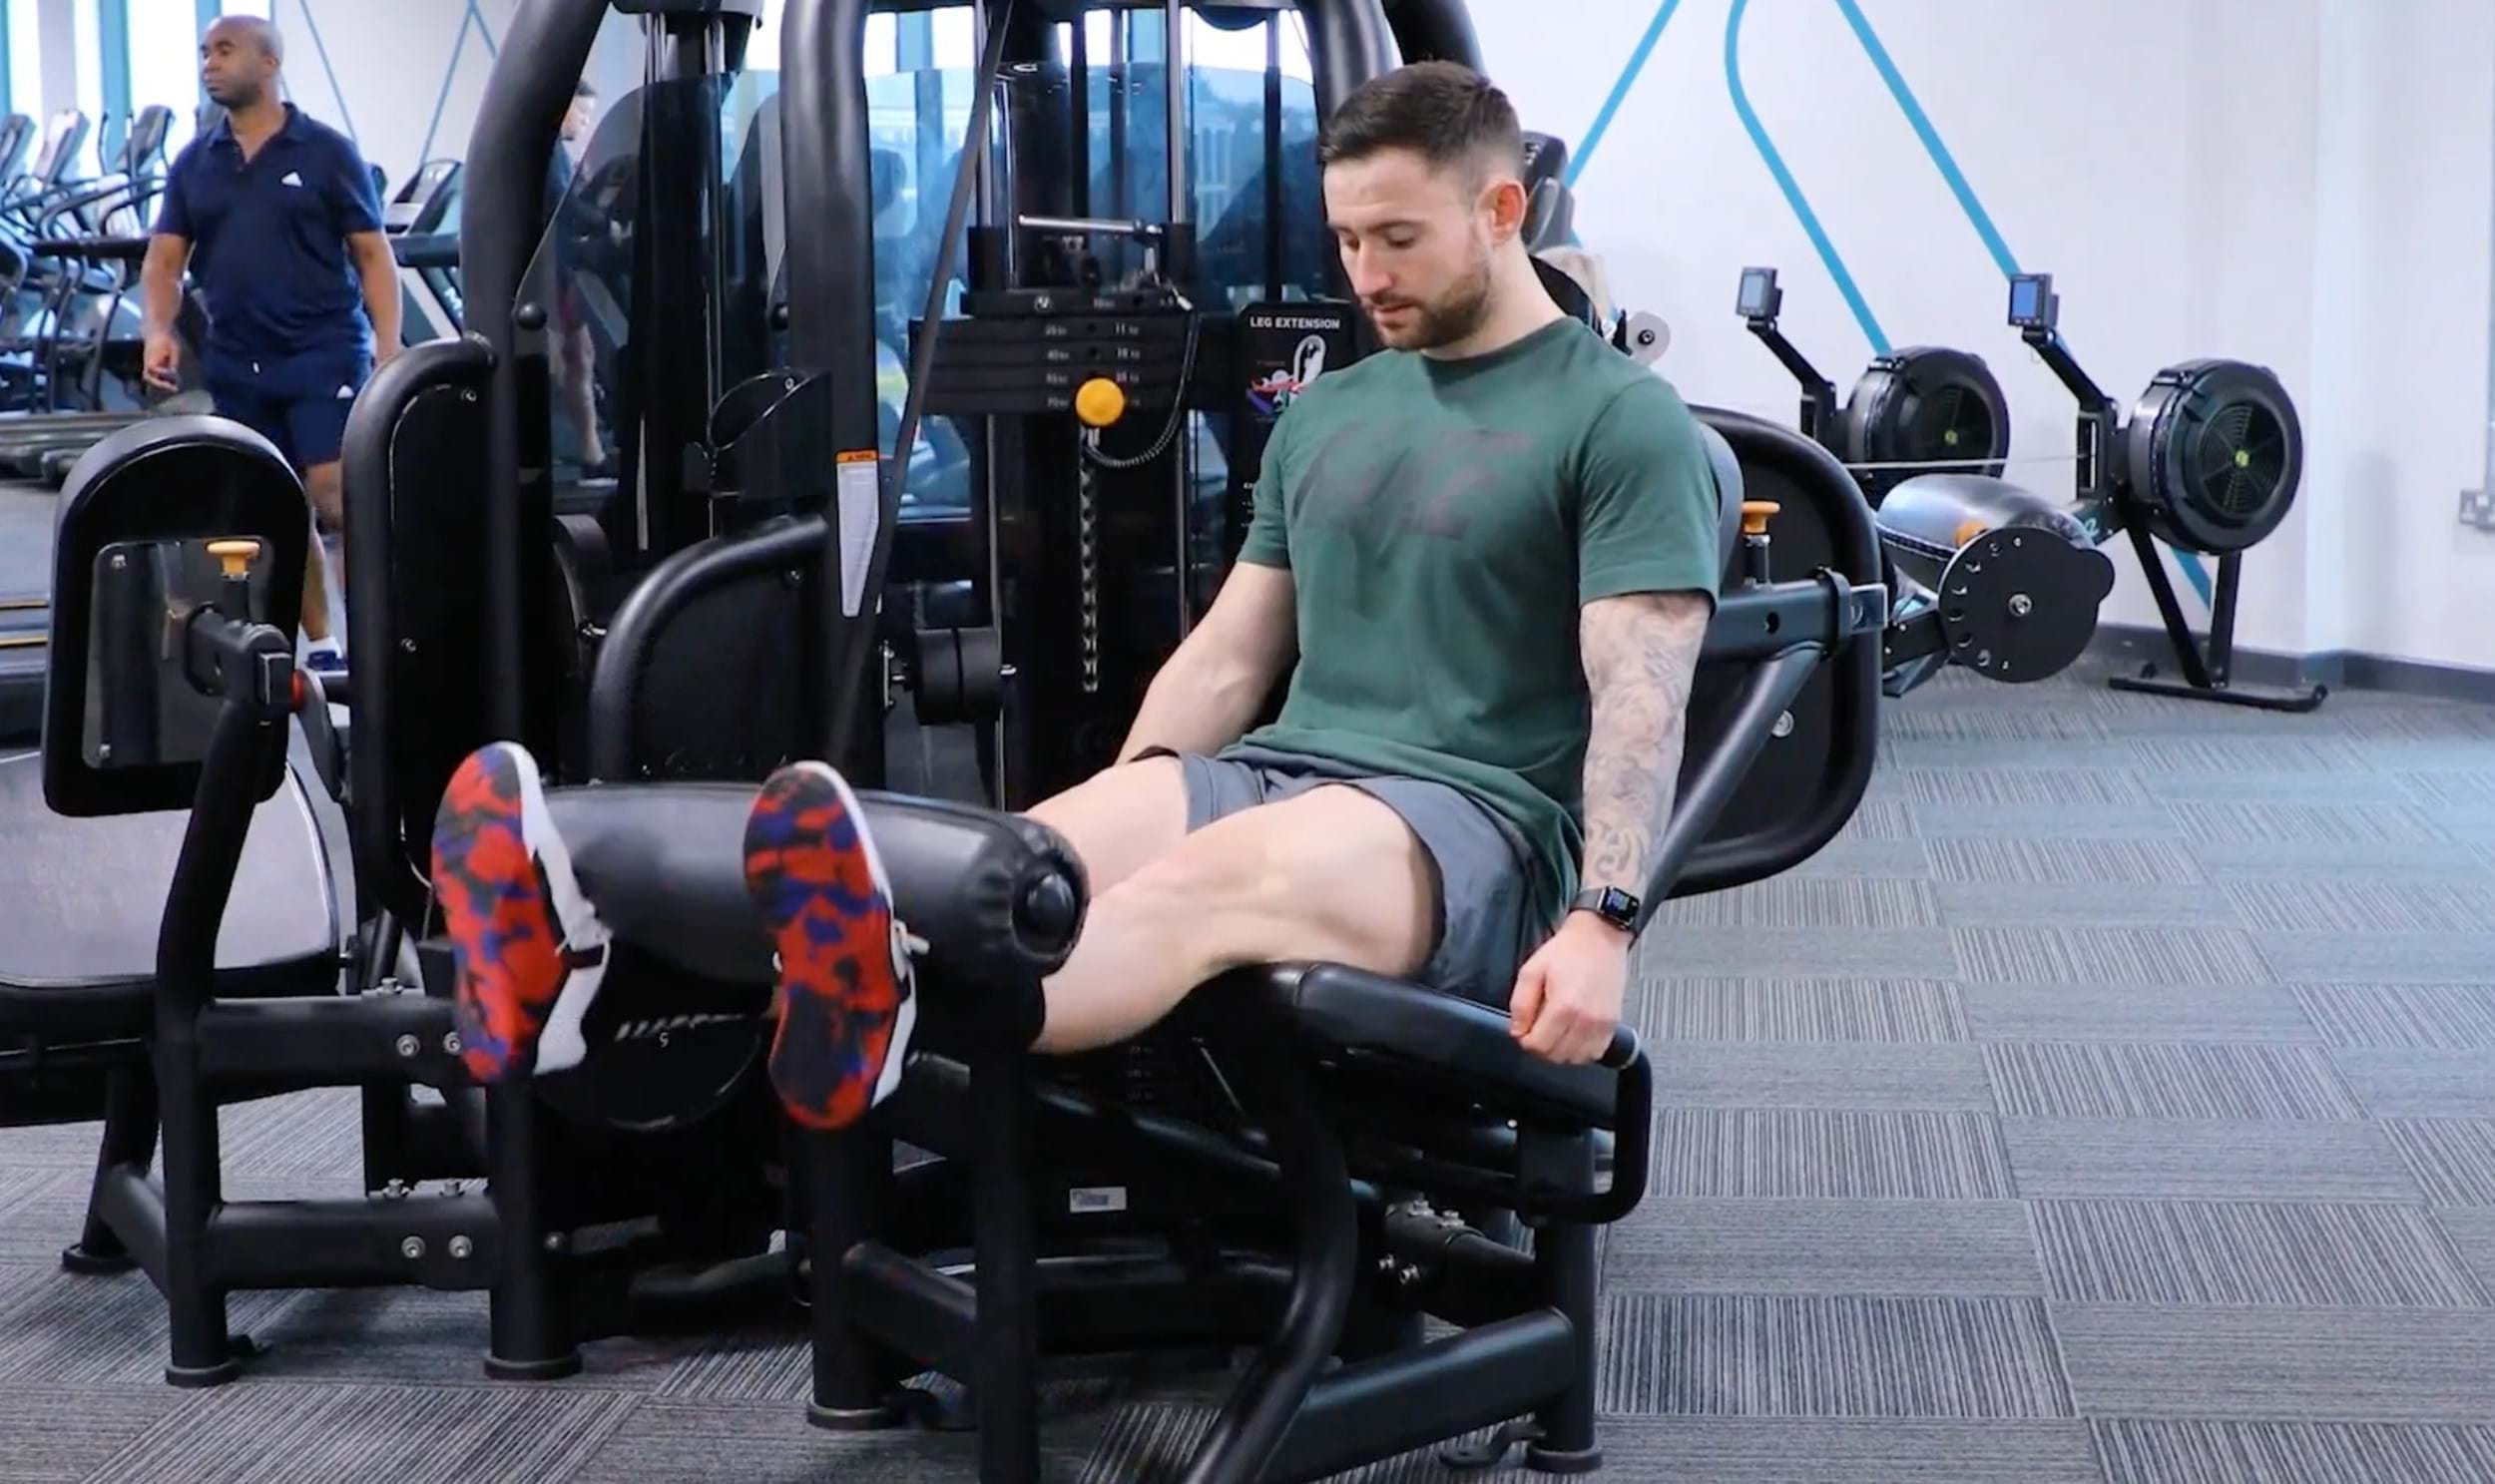 How to use the leg extension machine